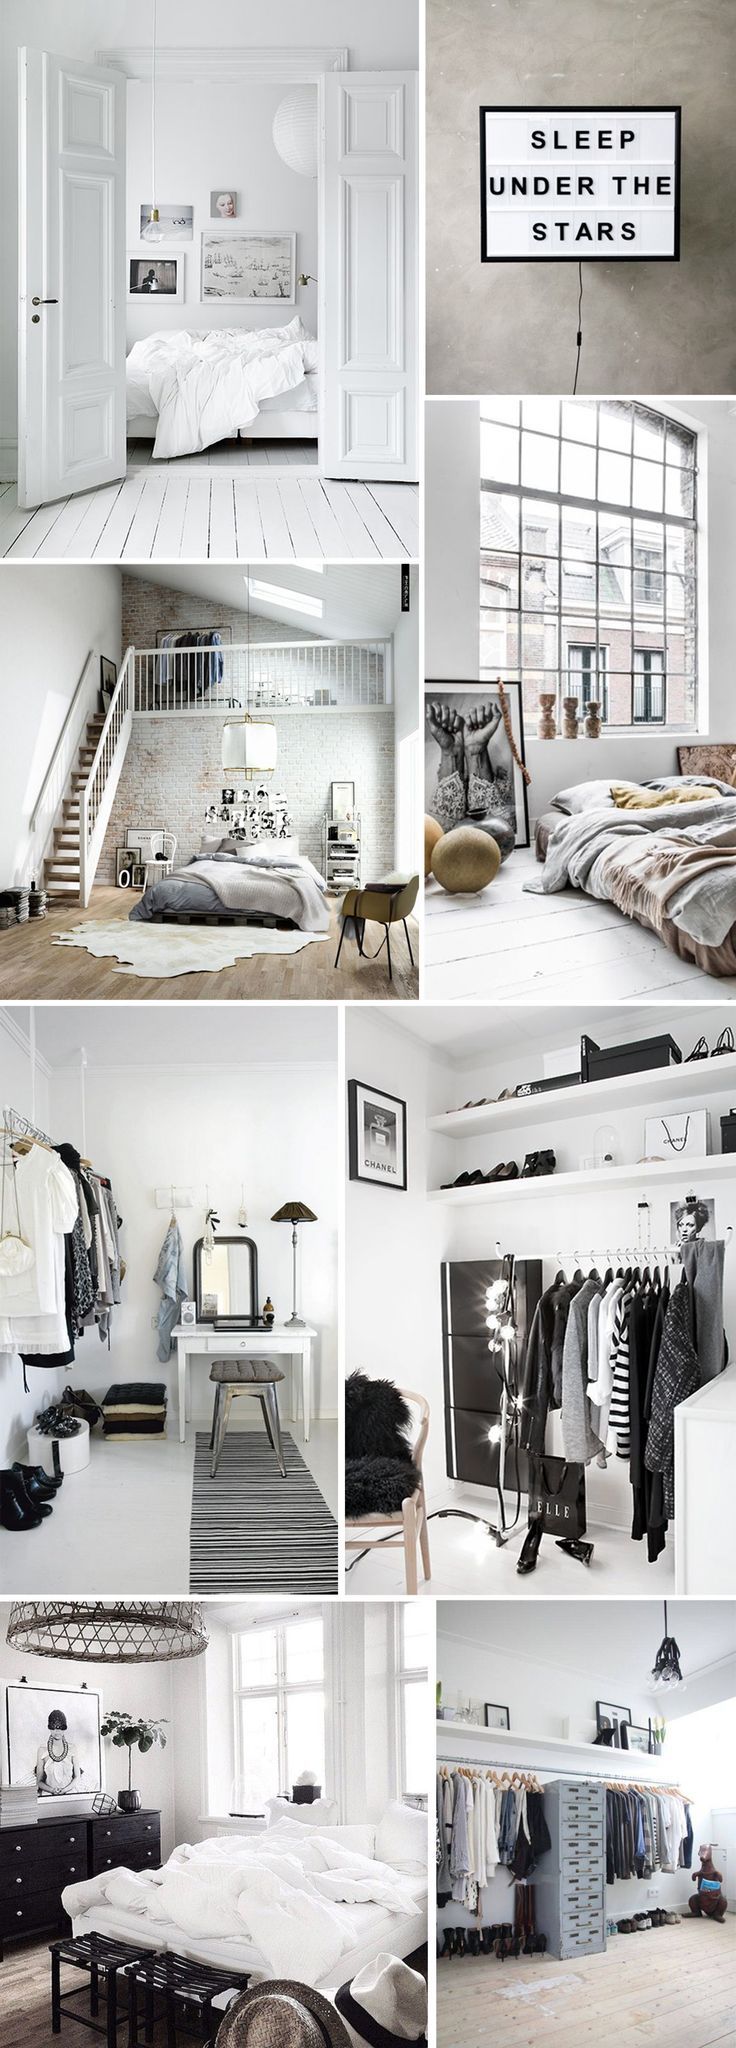 Bedroom inspiration (Passions for Fashion)